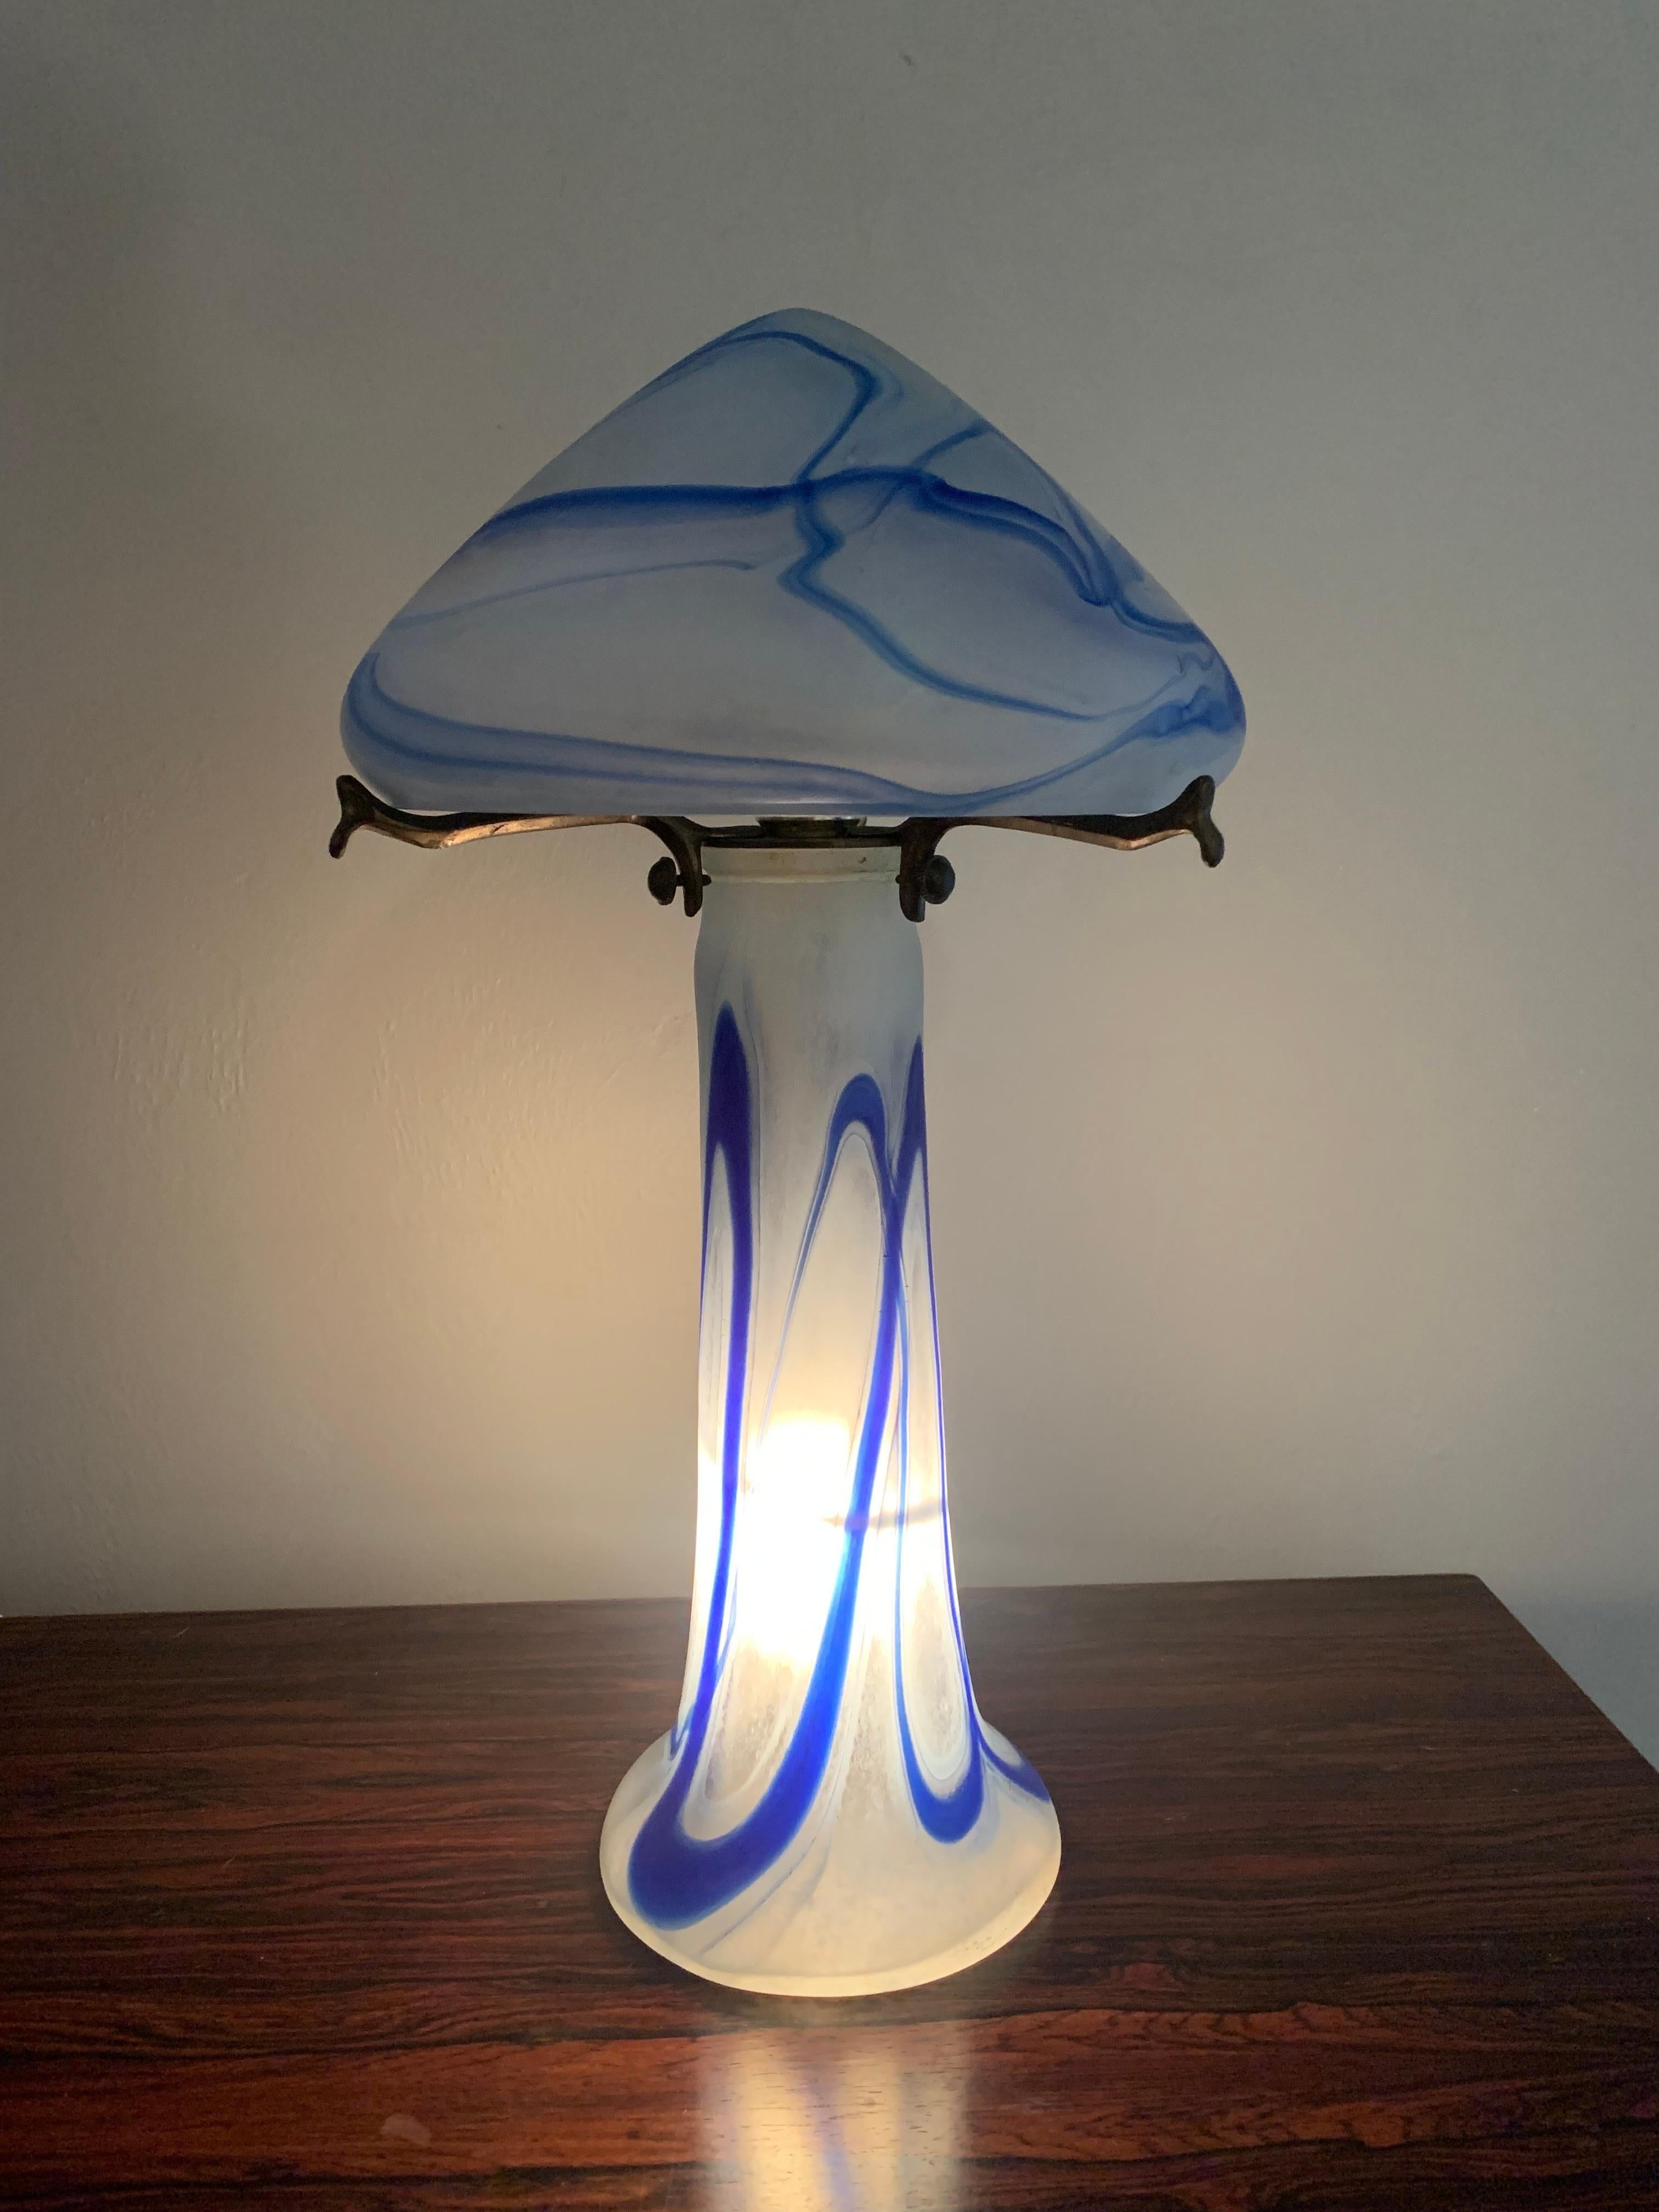 Antique French Art Nouveau Period Glass Lamp in Blue and White In Good Condition For Sale In Boynton Beach, FL